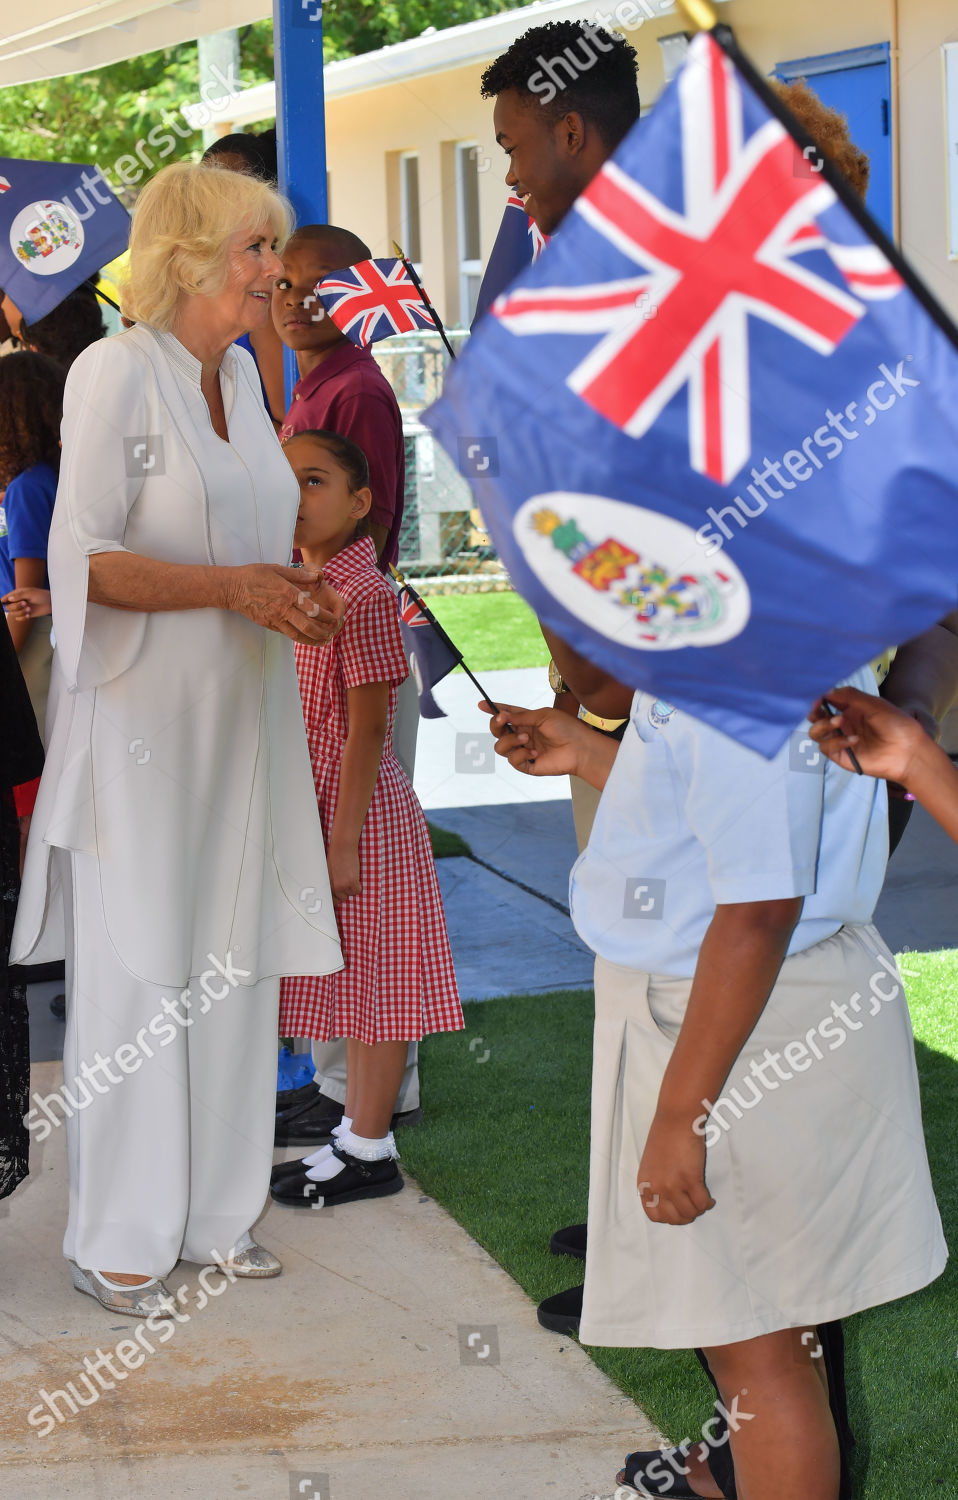 prince-charles-and-camilla-duchess-of-cornwall-caribbean-tour-cayman-islands-shutterstock-editorial-10180907t.jpg